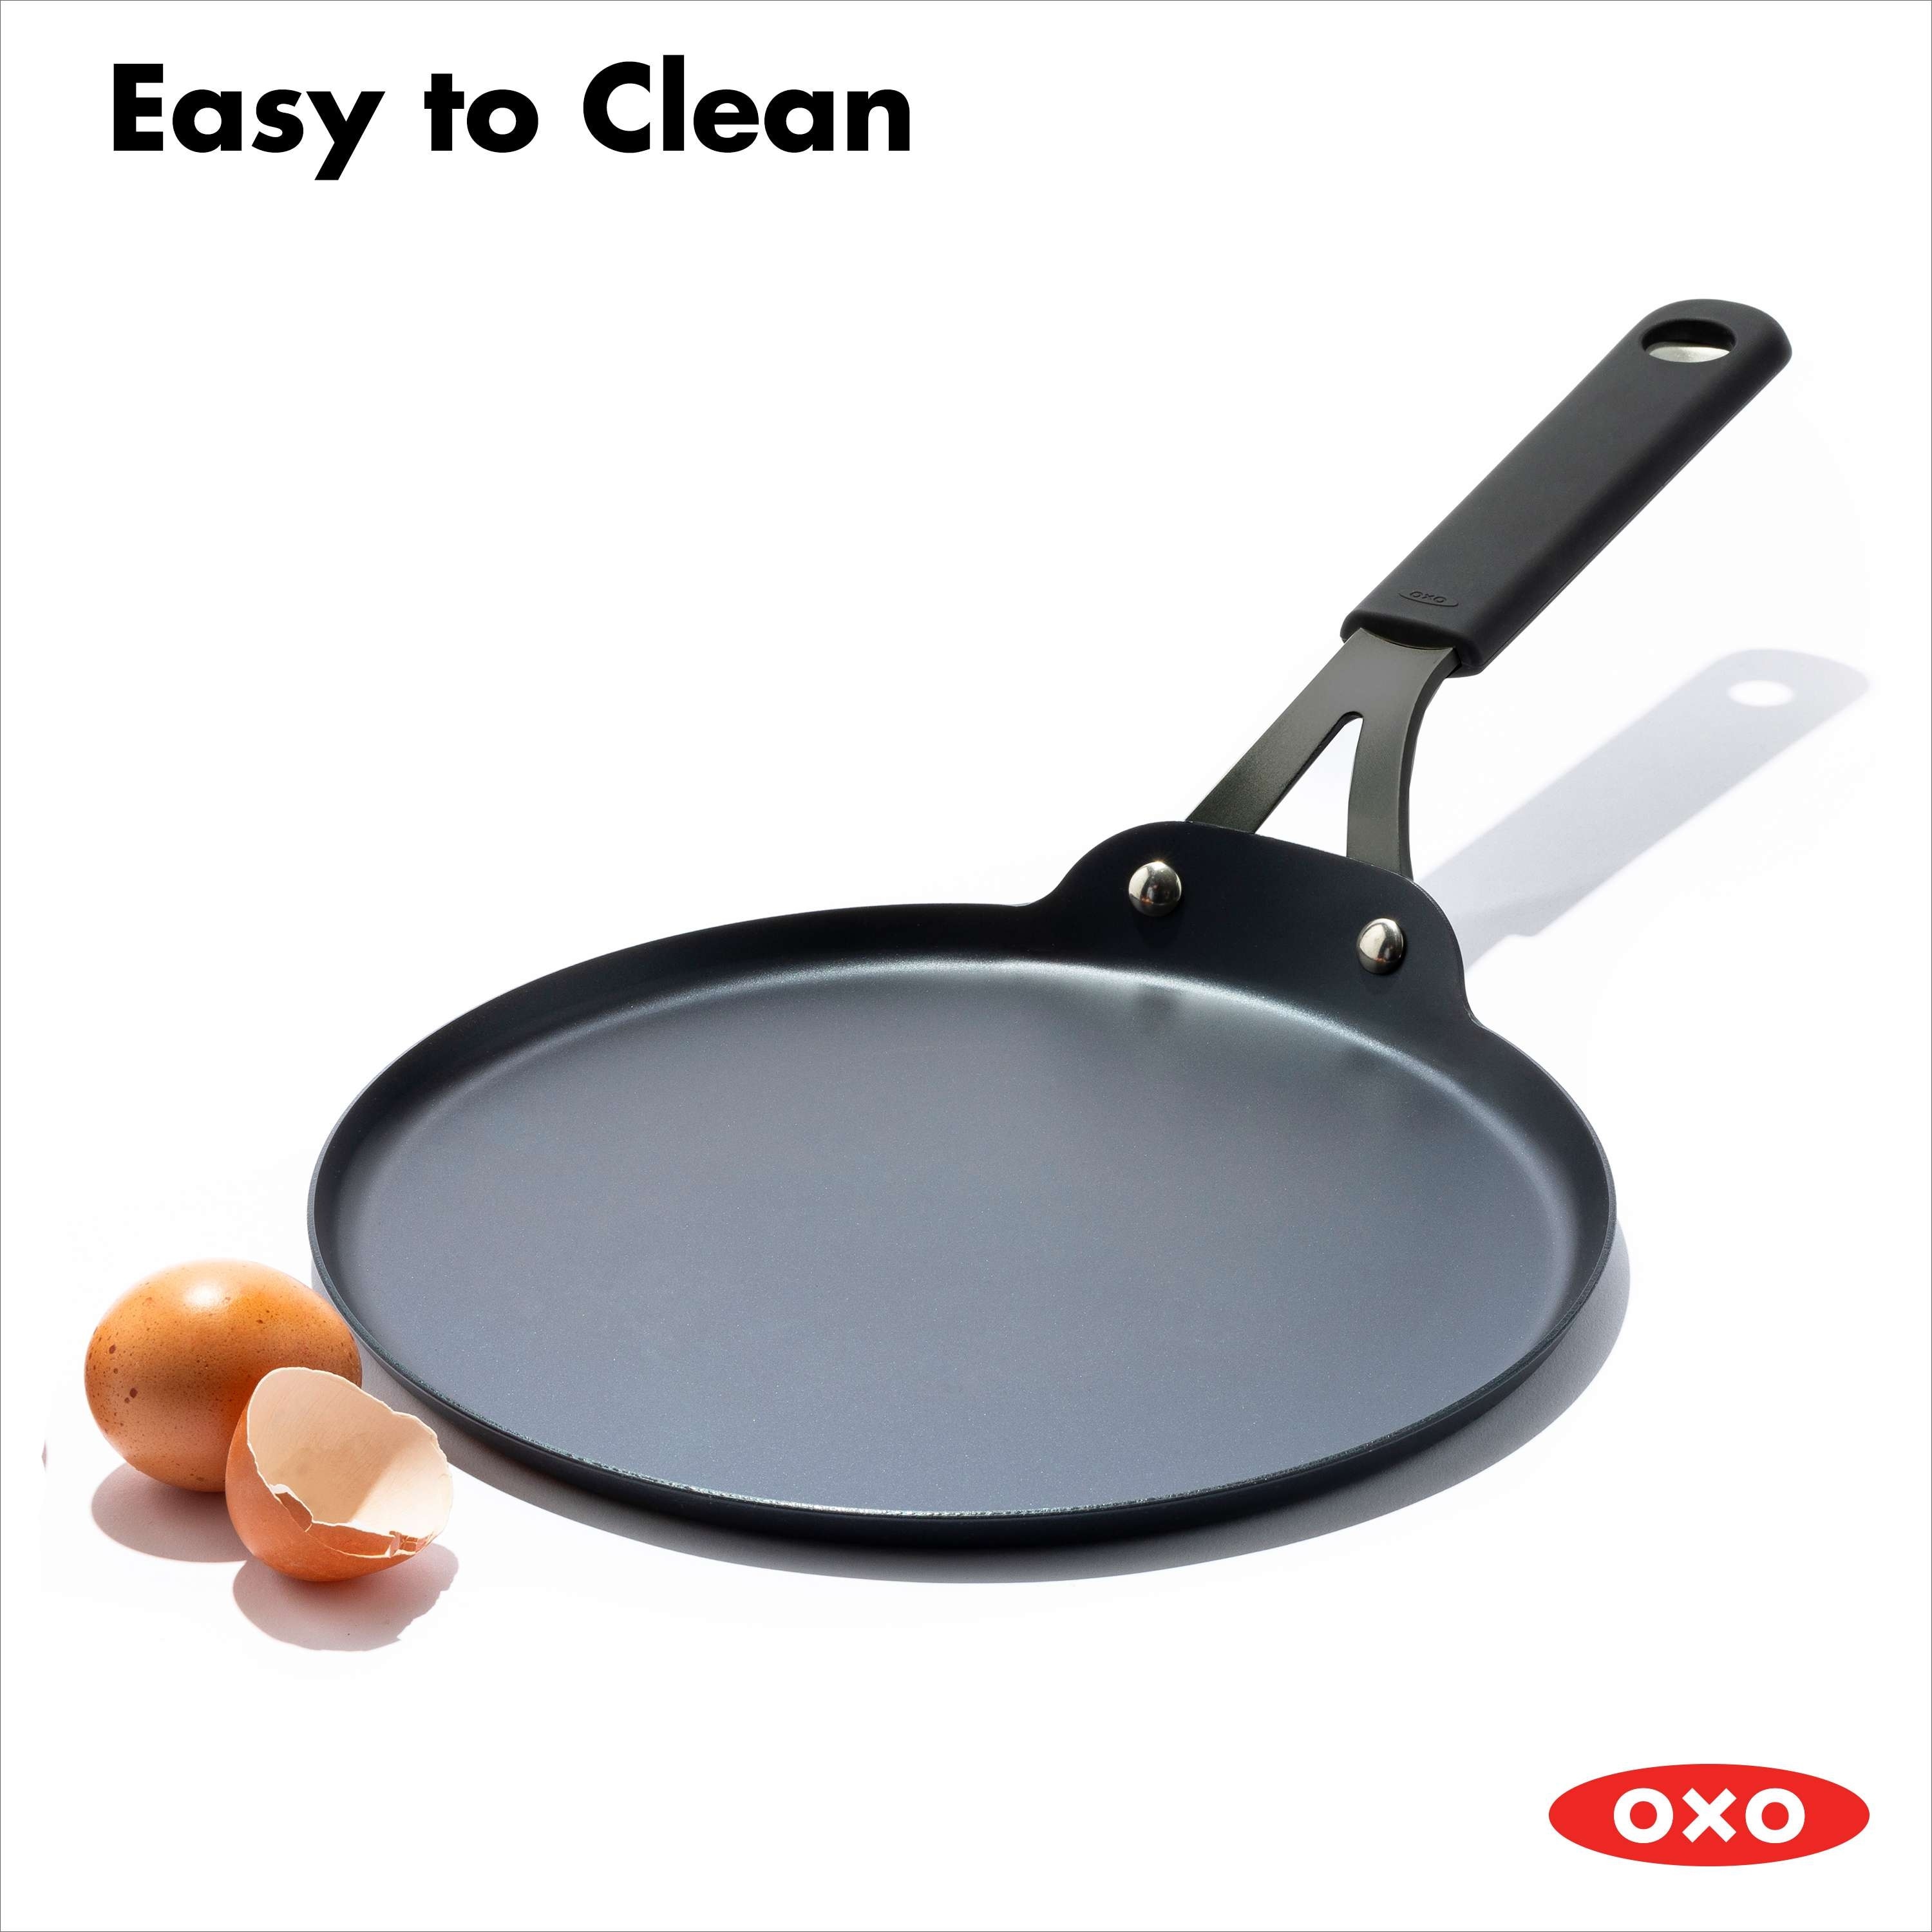 https://ak1.ostkcdn.com/images/products/is/images/direct/f1d2249398eba4476f76c615cbd4a843ed906d8b/OXO-Black-Steel-Crepe-Pan-10%22-w--Silicone-Sleeve.jpg